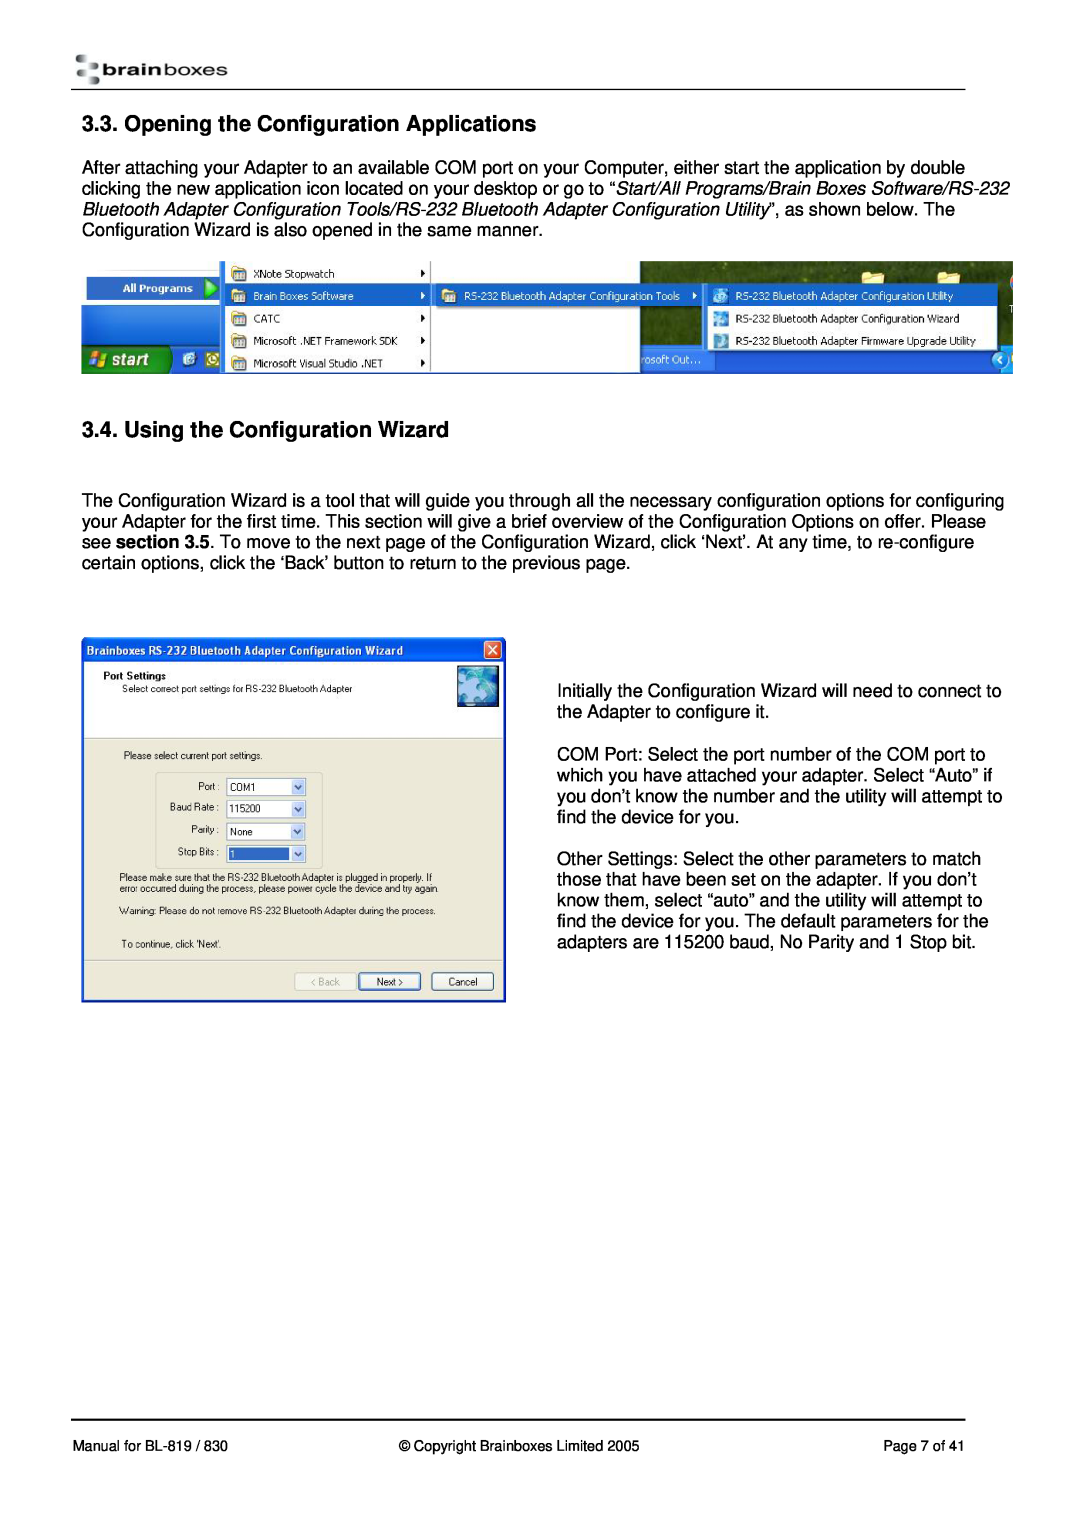 Brainboxes BL-819, BL-830 manual Opening the Configuration Applications, Using the Configuration Wizard, Page 7 of 